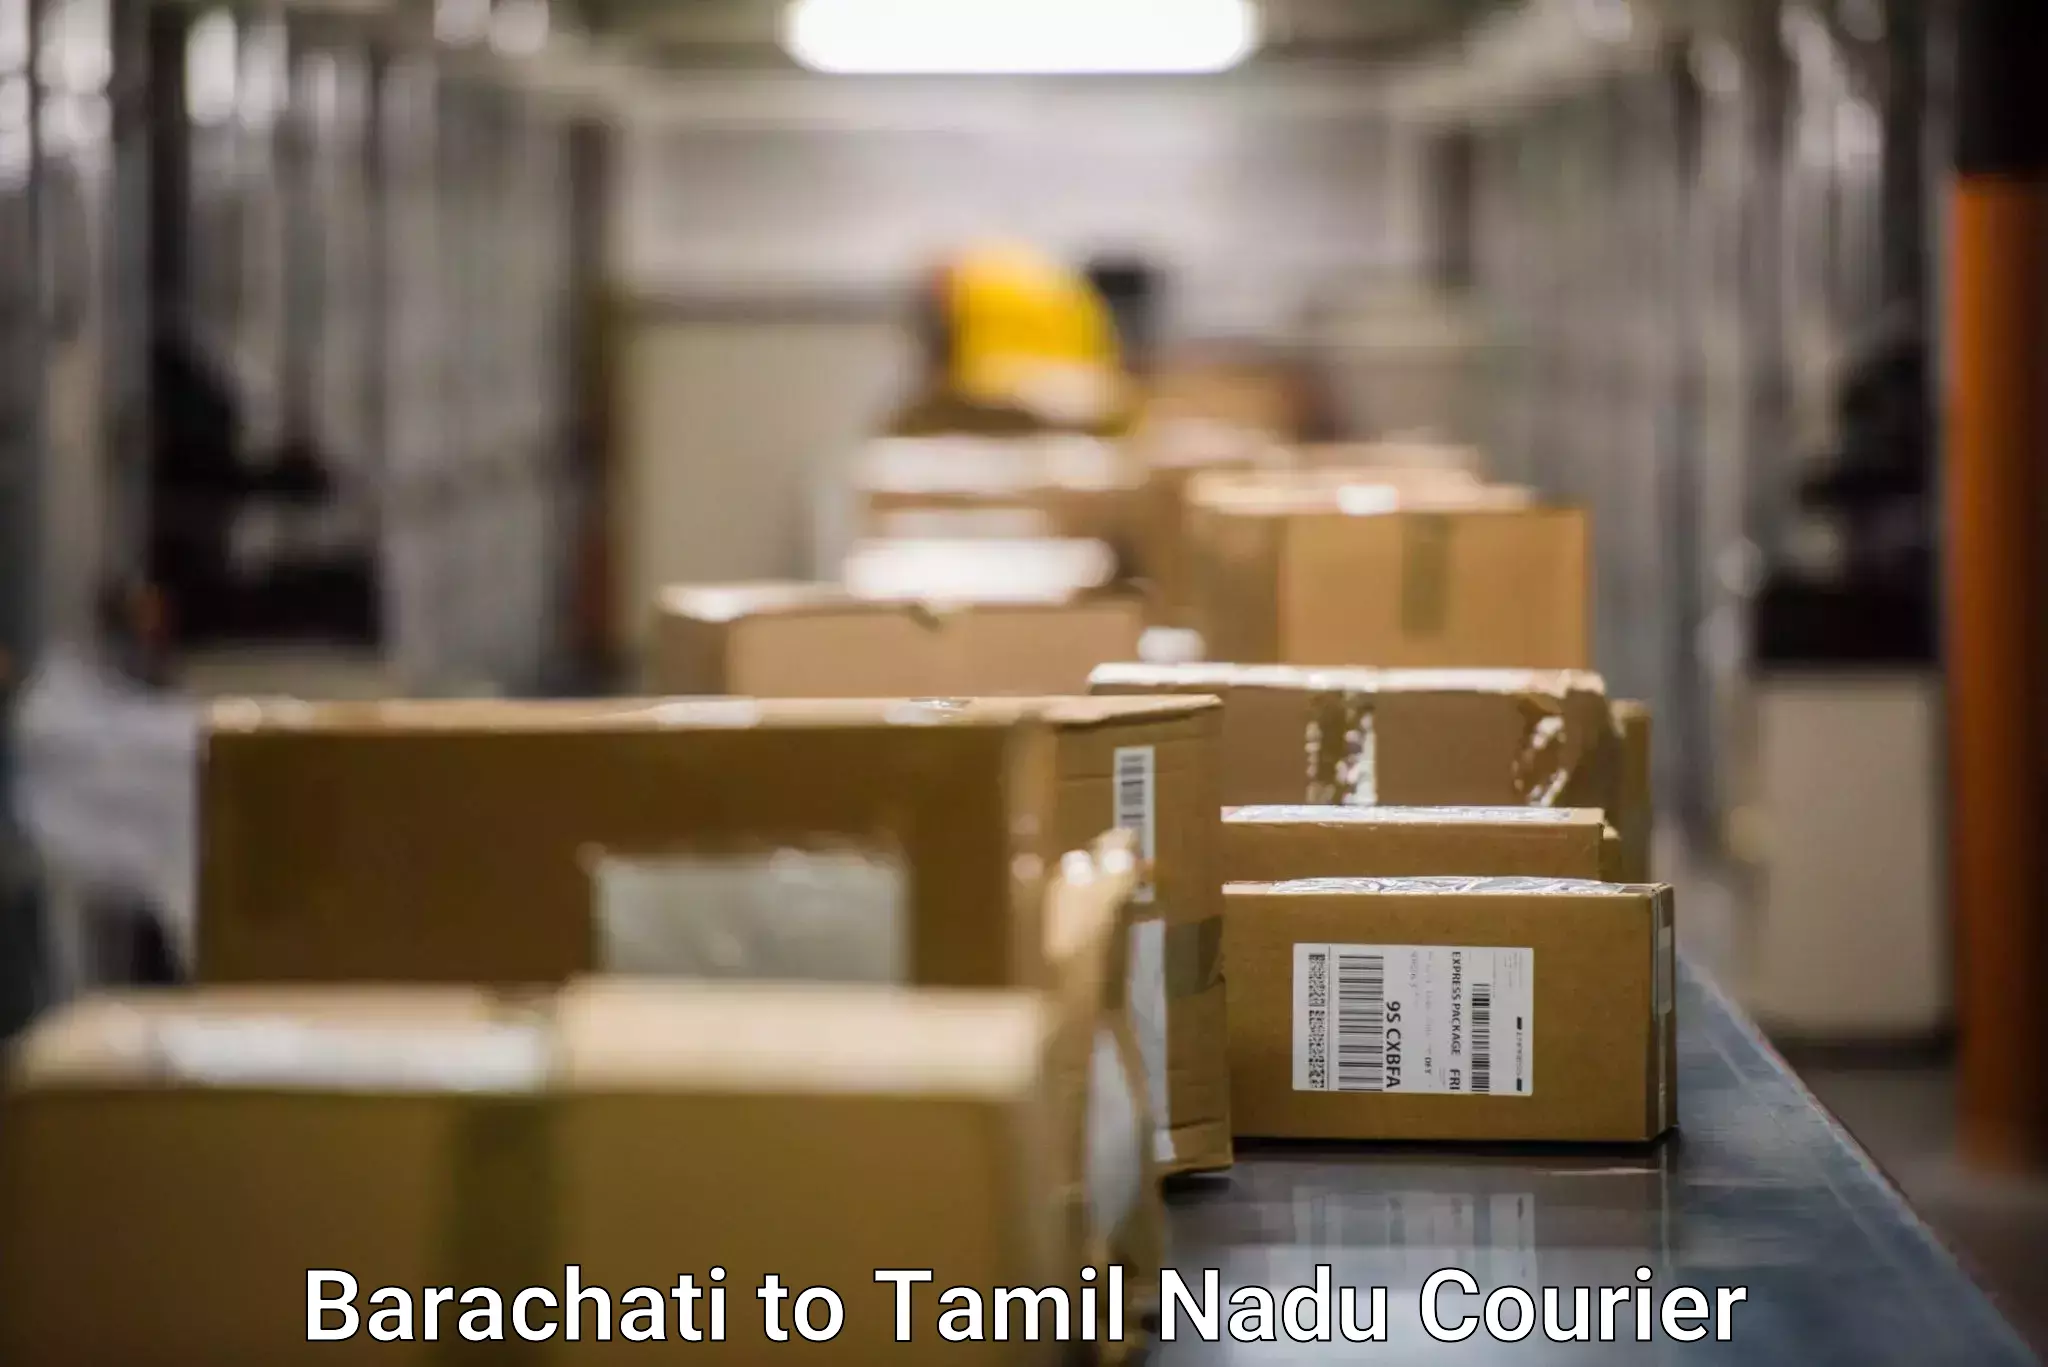 Global freight services Barachati to Meenakshi Academy of Higher Education and Research Chennai